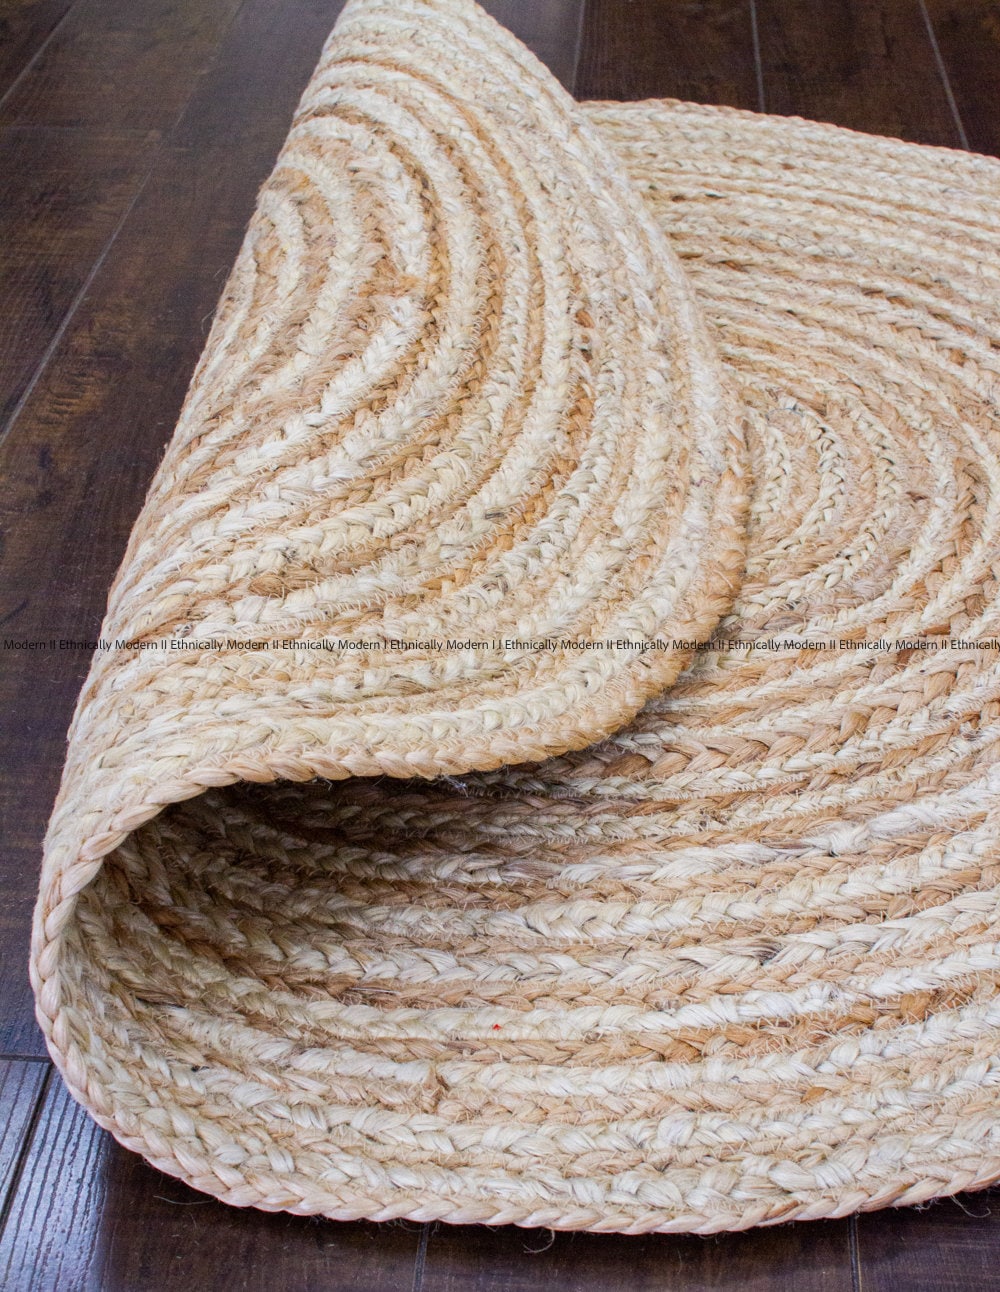 Braided Ivory and Natural Jute Round Rug, Reversible, Natural Fibre Rug, Coastal, Cottage, Casual Decor